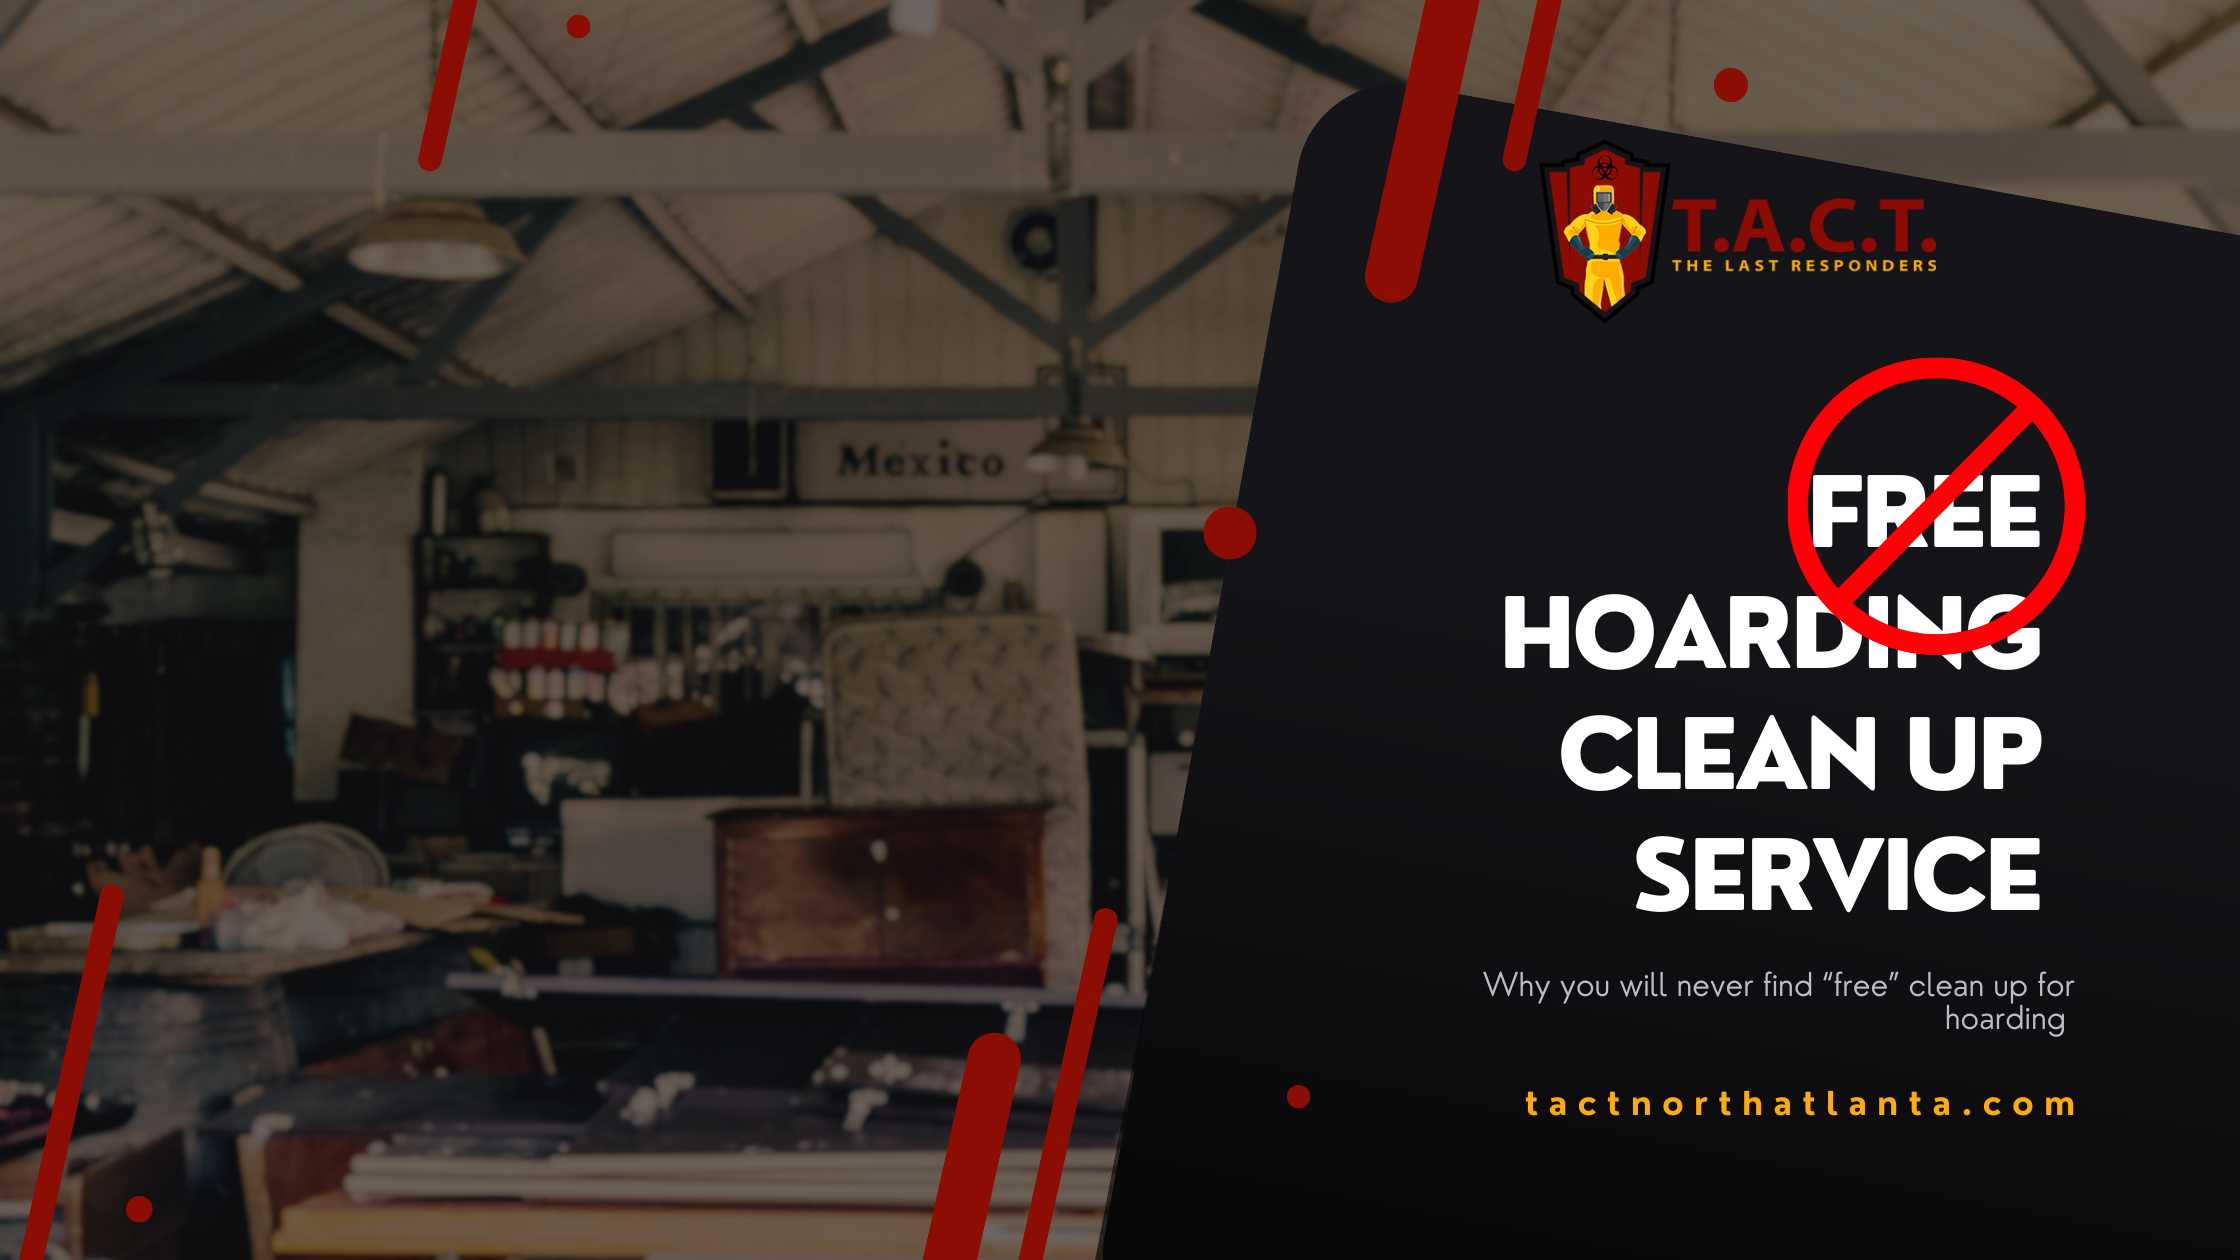 Why There Aren’t Free Hoarding Cleanup Services